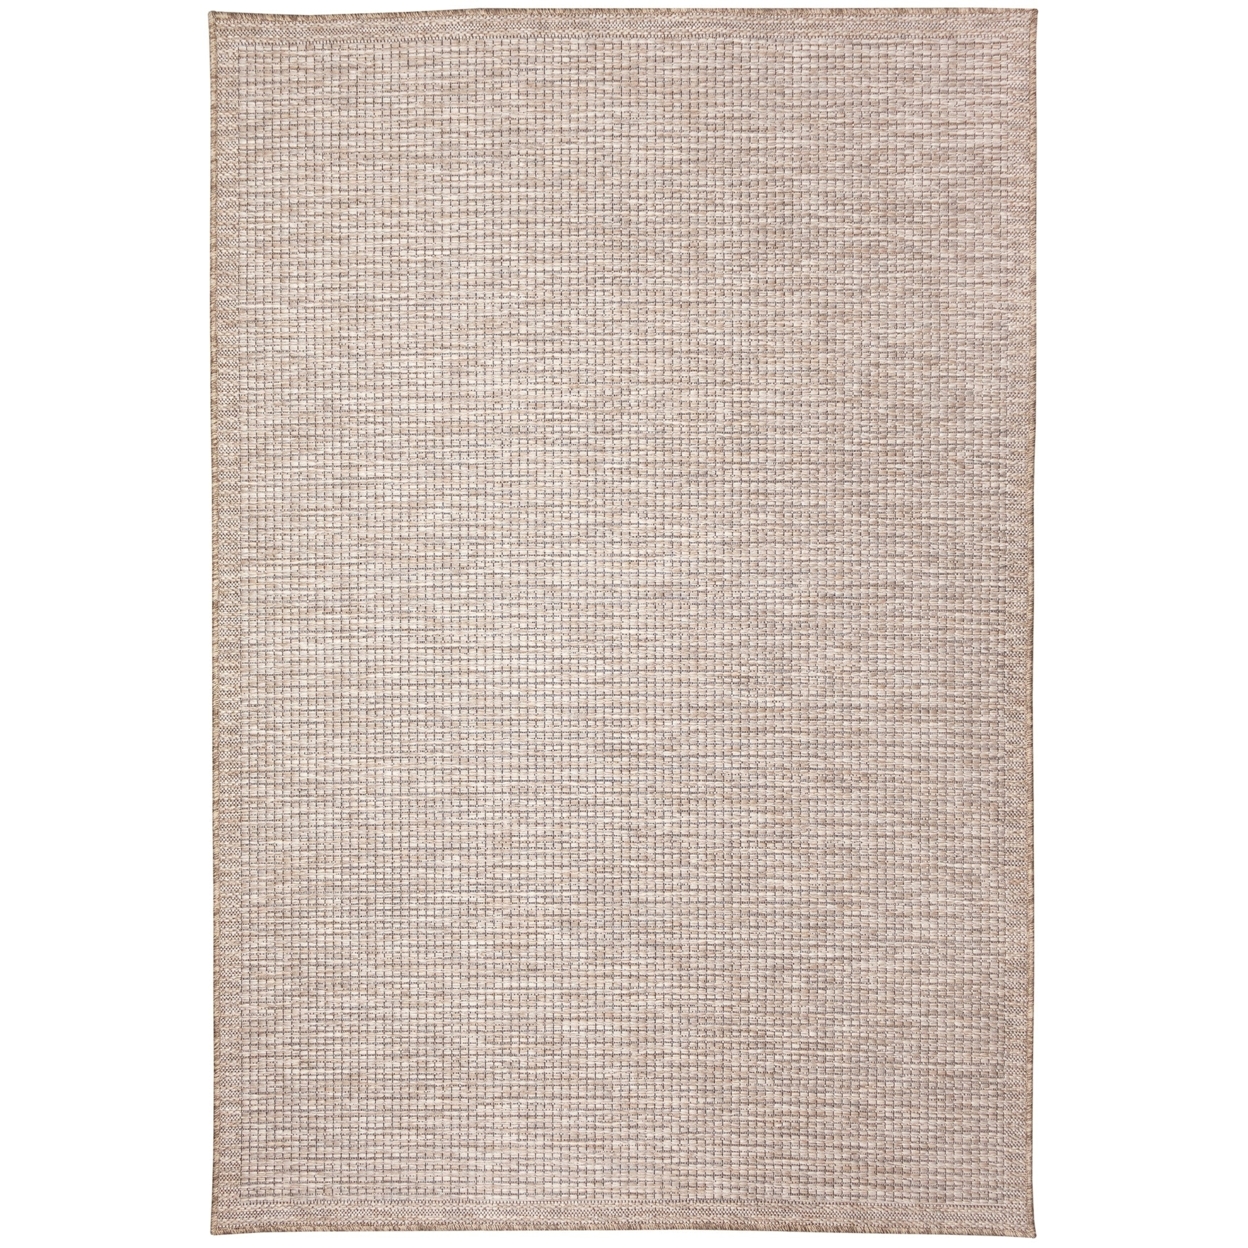 Liora Manne Orly Texture Indoor Outdoor Area Rug Natural - 1'11 X 7'6